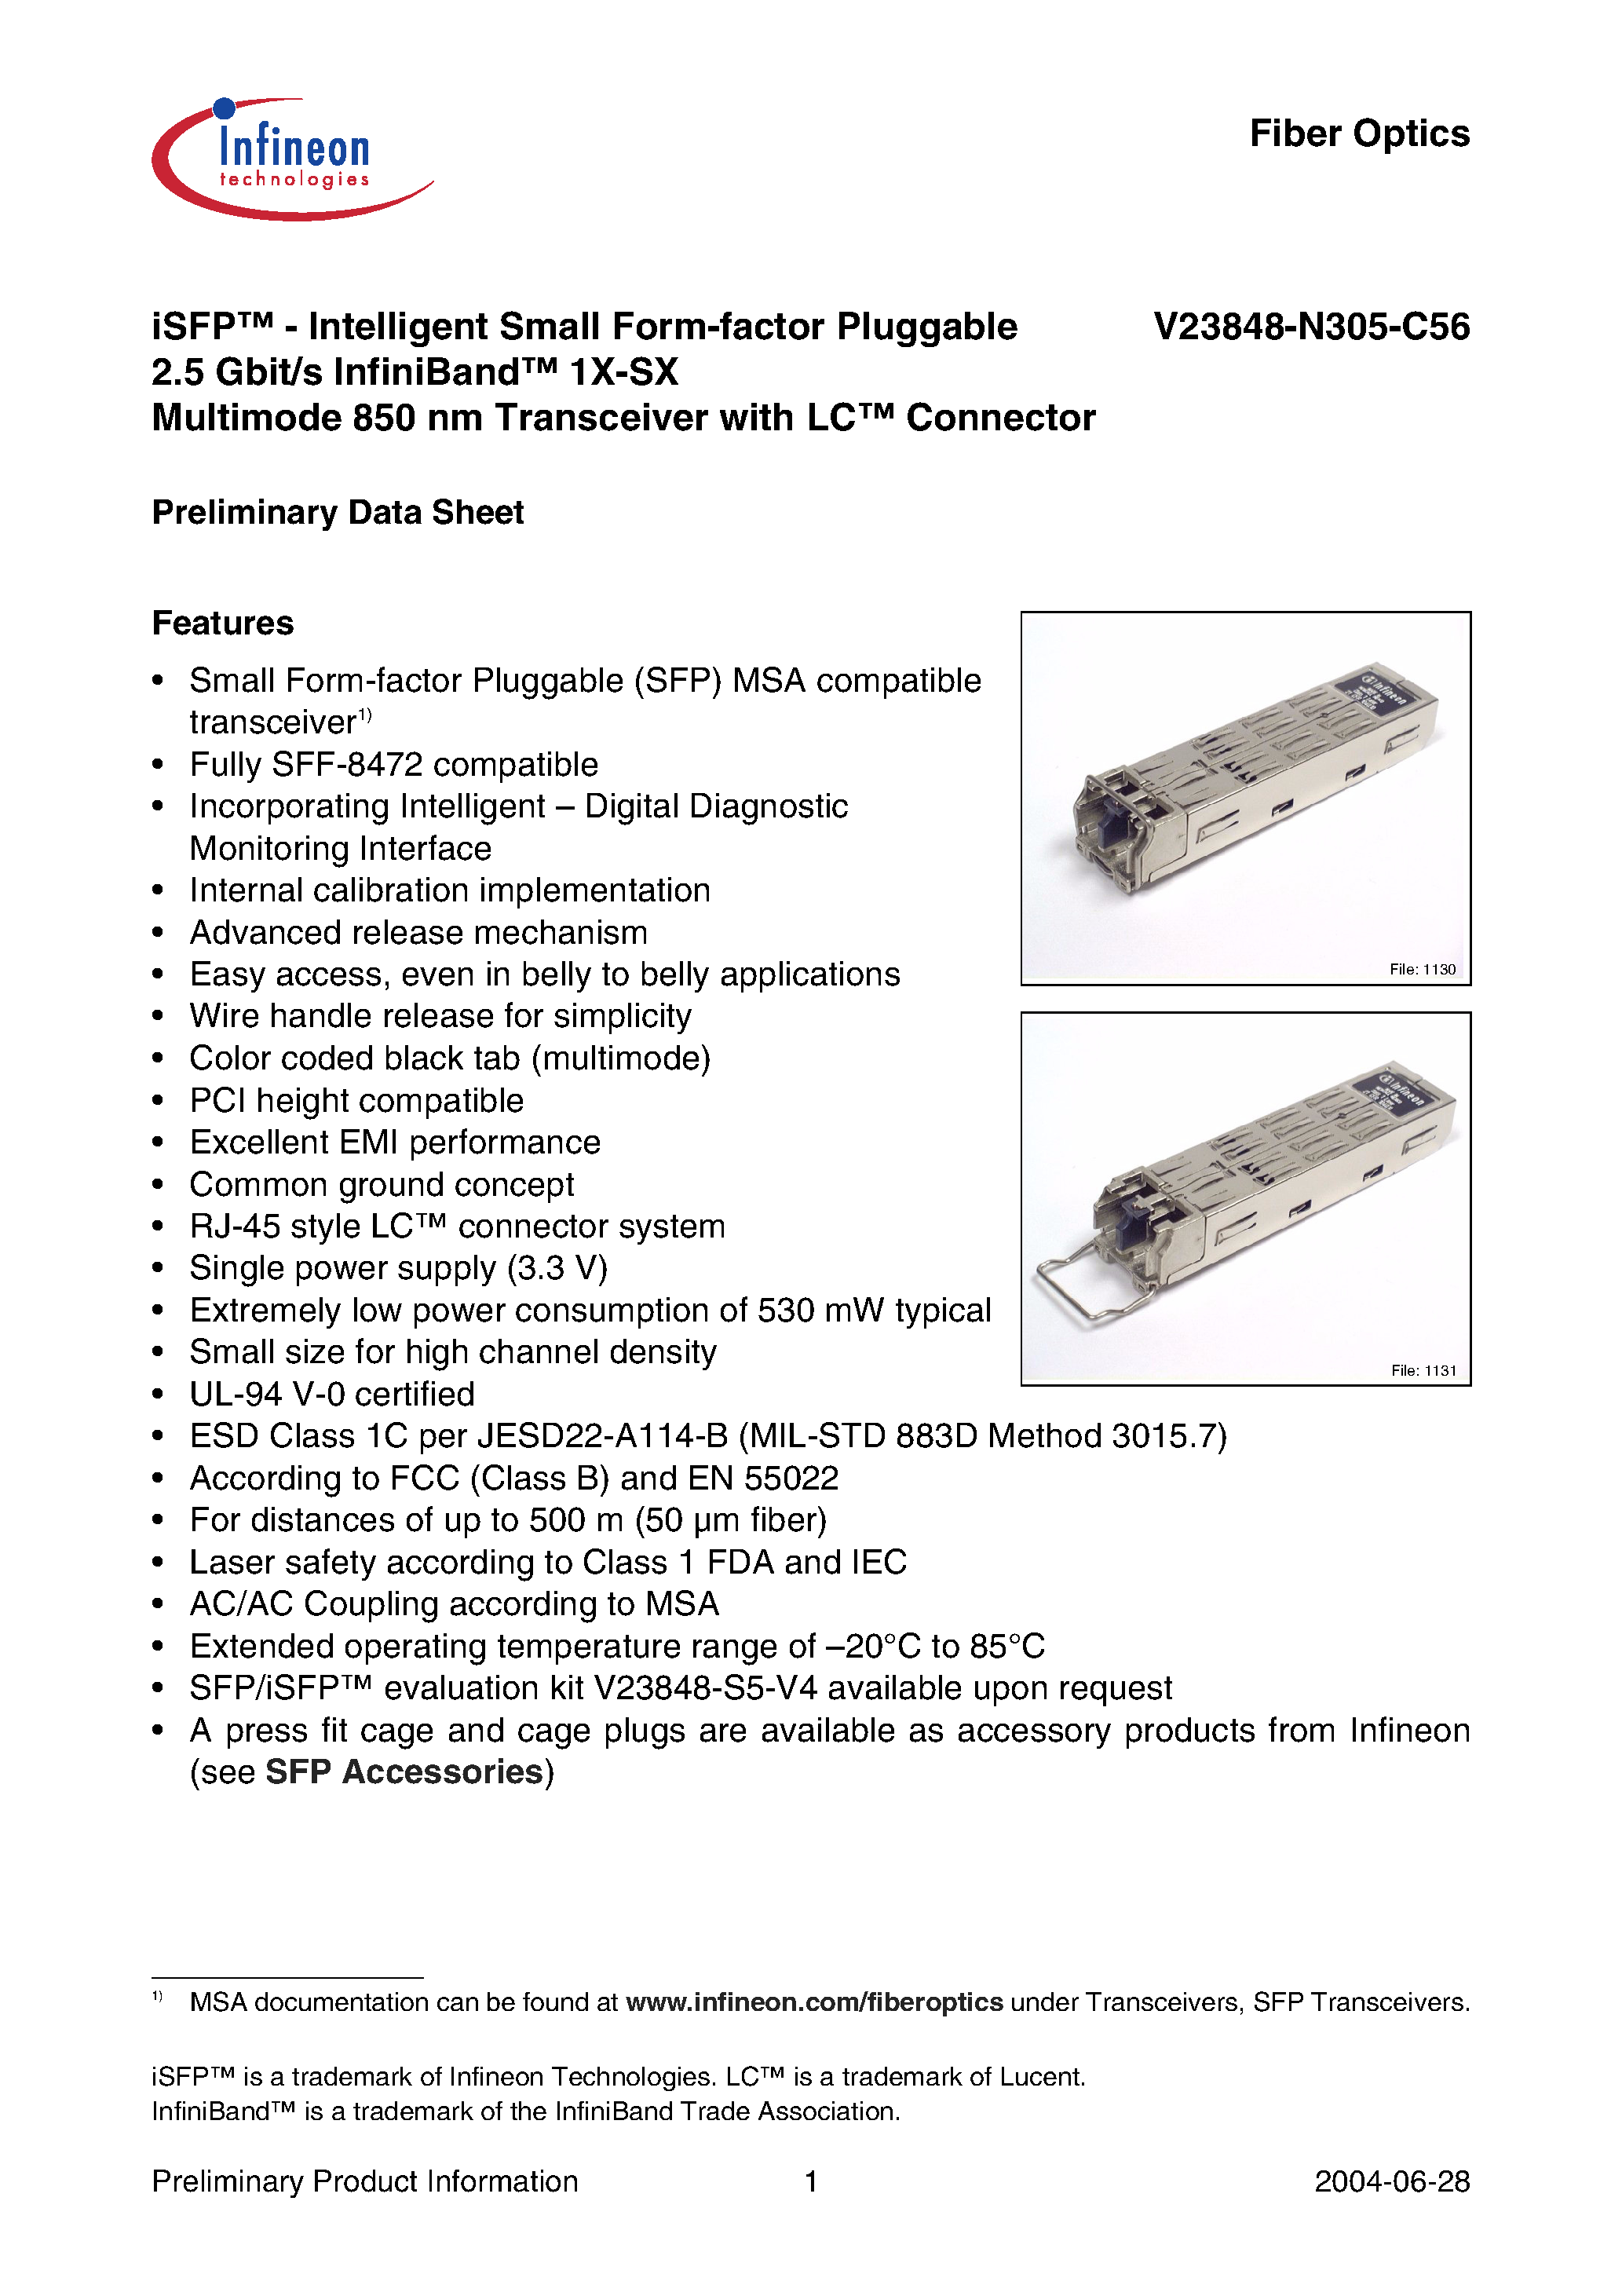 Datasheet V23848-N305-C56 - iSFP-Intelligent Small Form-factor Pluggable 2.5 Gbit/s InfiniBand 1X-SX Multimode 850 nm Transceiver with LC Connector page 1